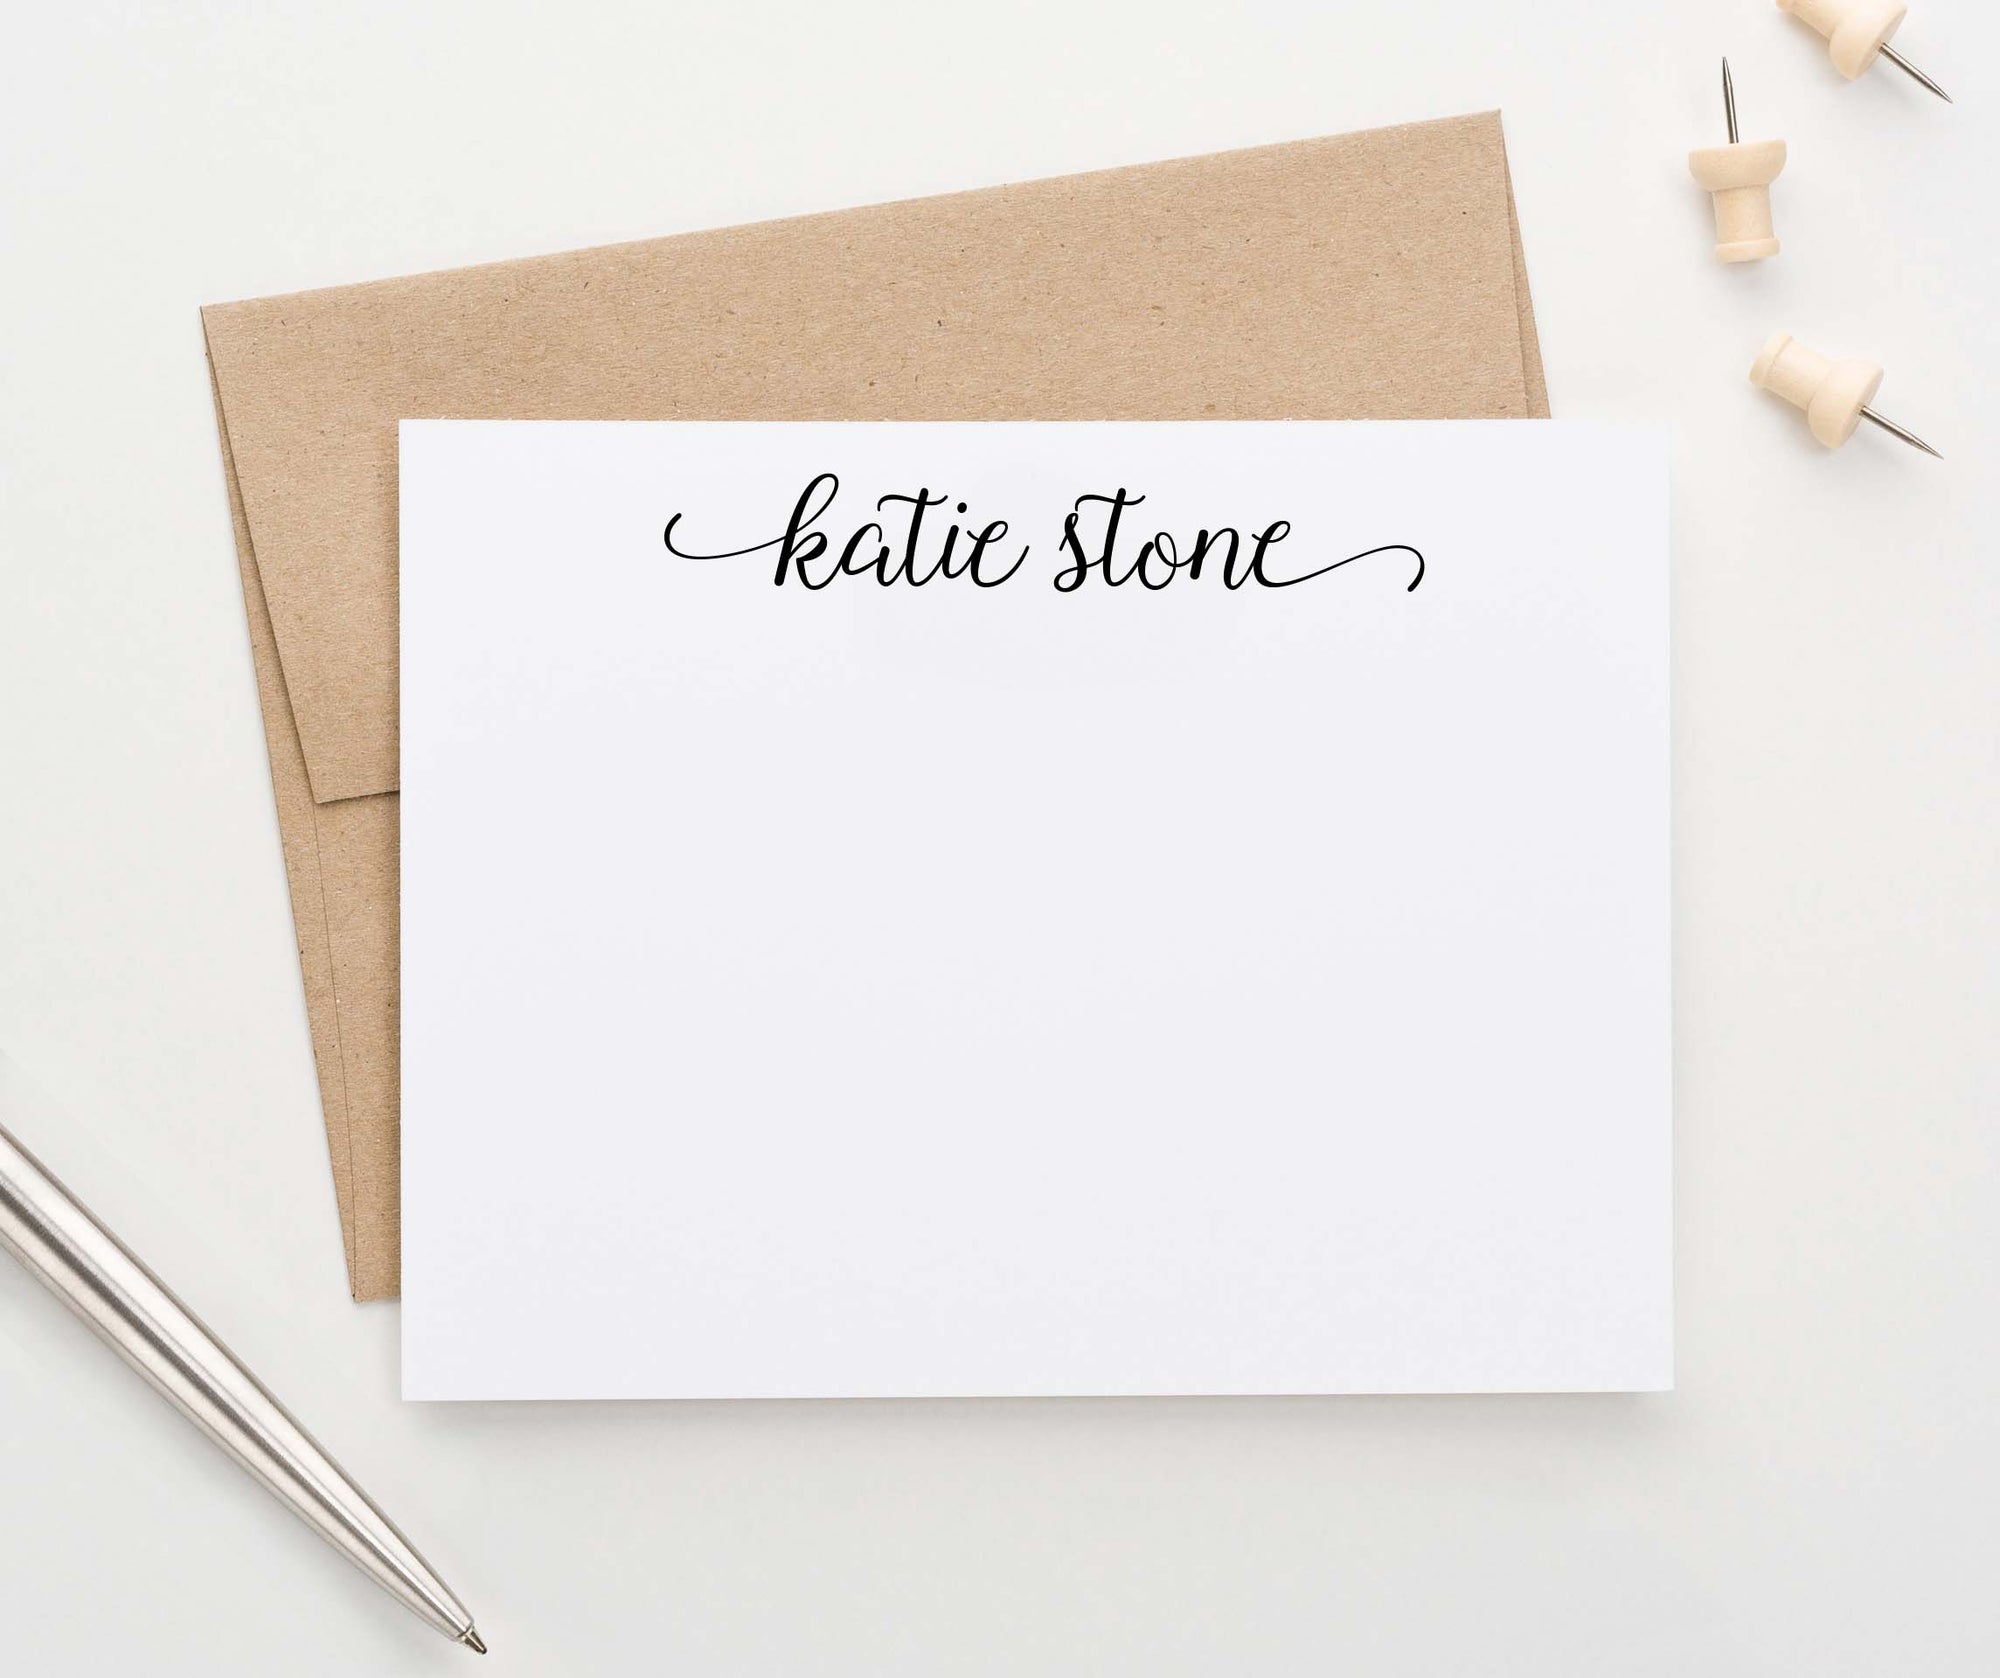 Personalized Note Cards - Modern Pink Paper